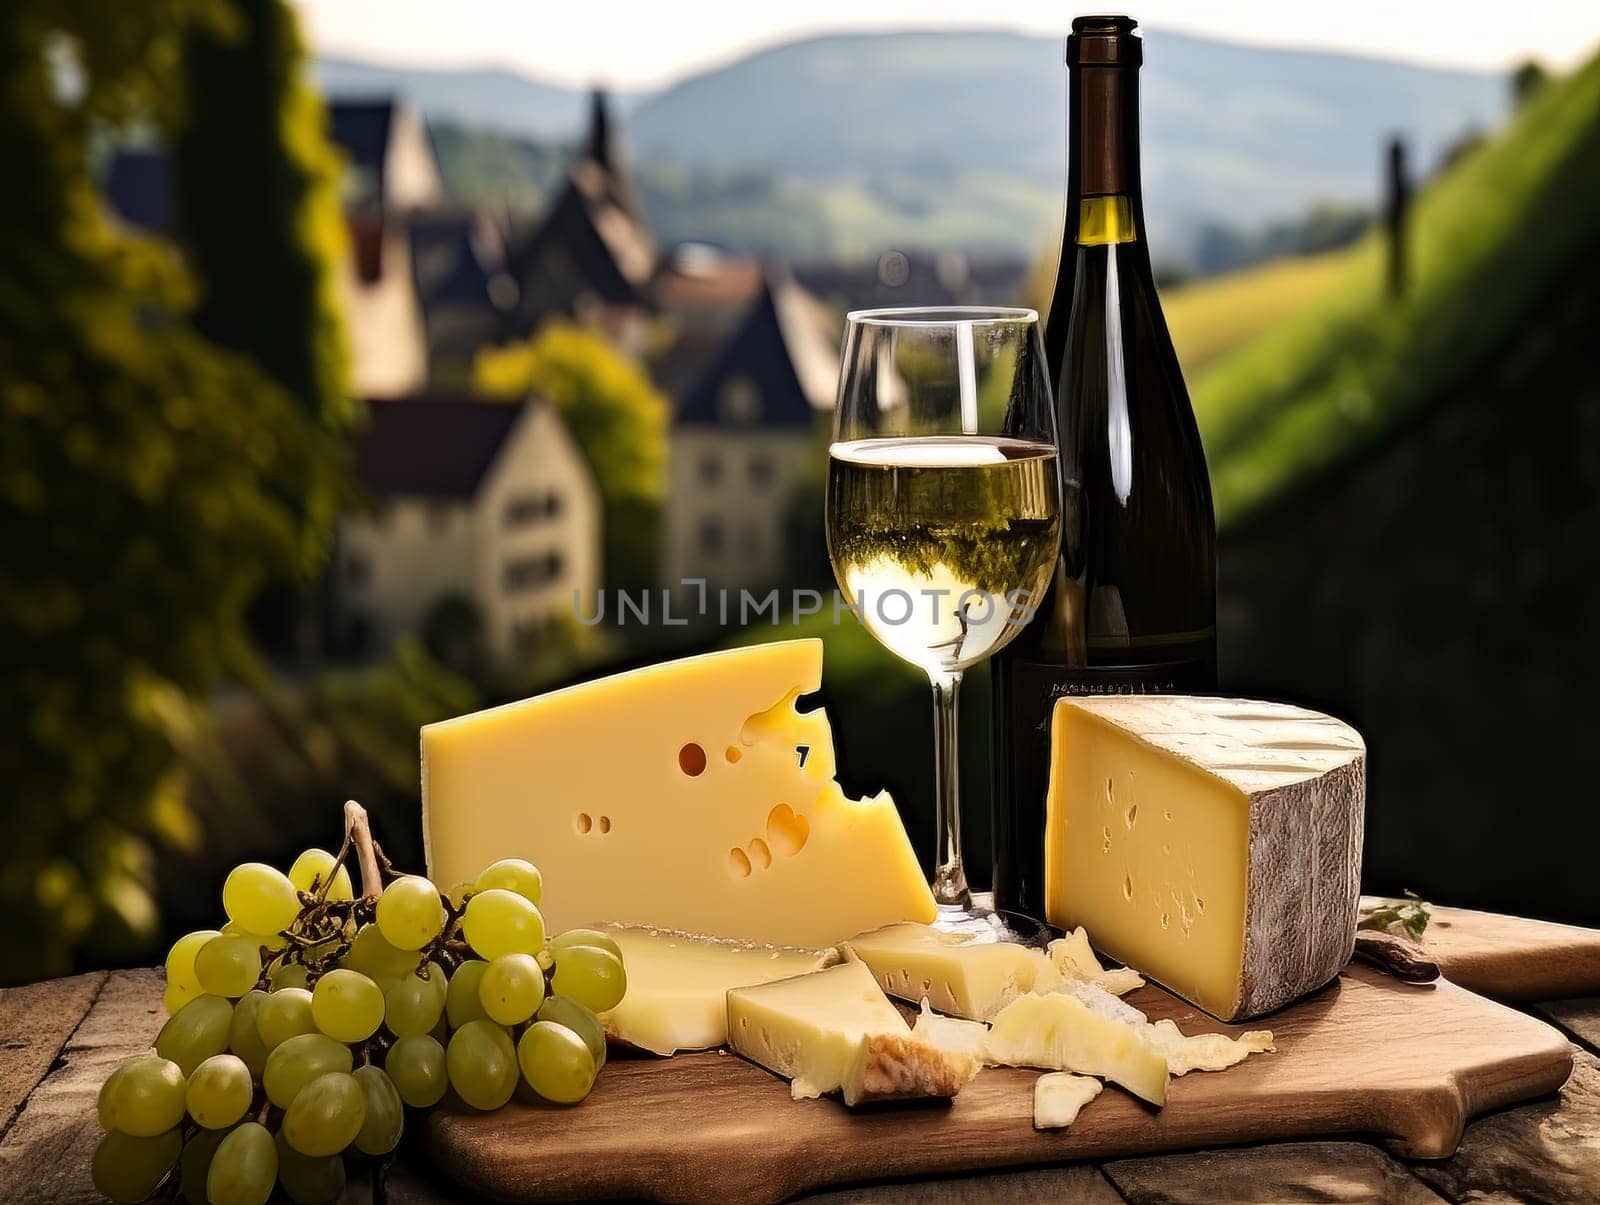 Board with cheeses, white wine in a glass and grapes. Still life of table for tasting cheese and wine, cozy romantic atmosphere, outdoor village panorama on a warm sunny day AI